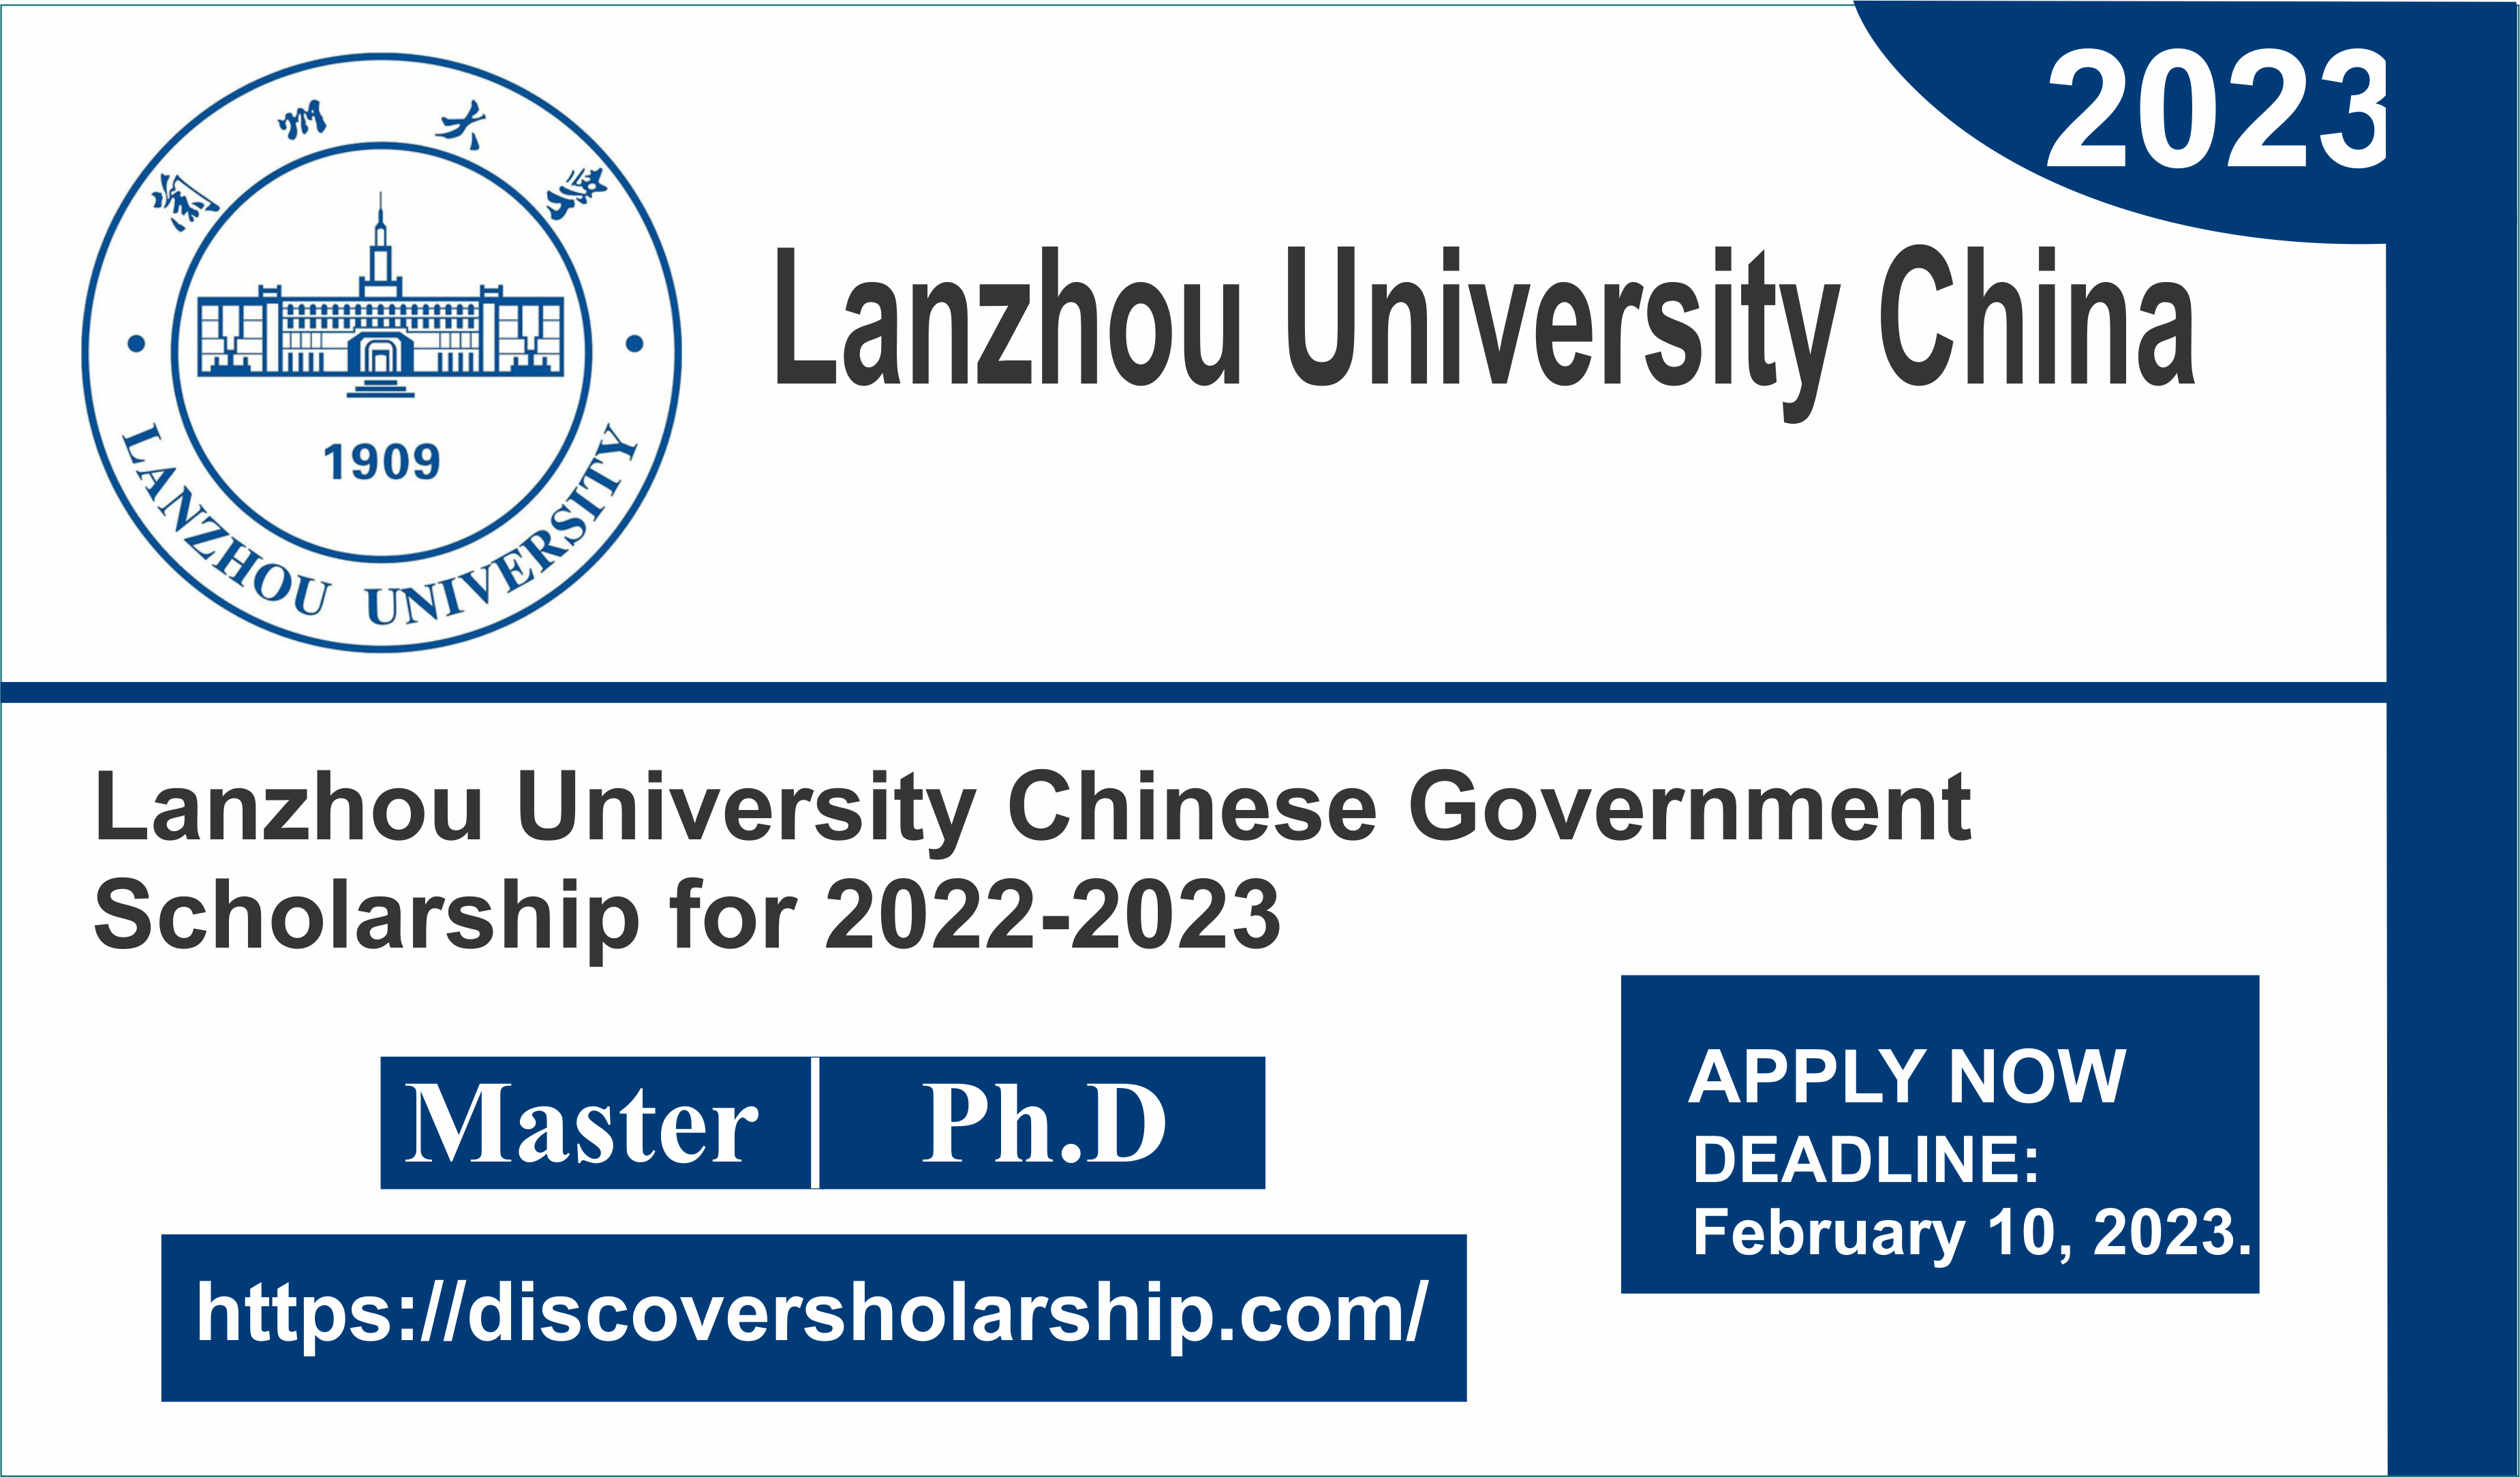 Lanzhou University Chinese Government Scholarship for 2022-2023